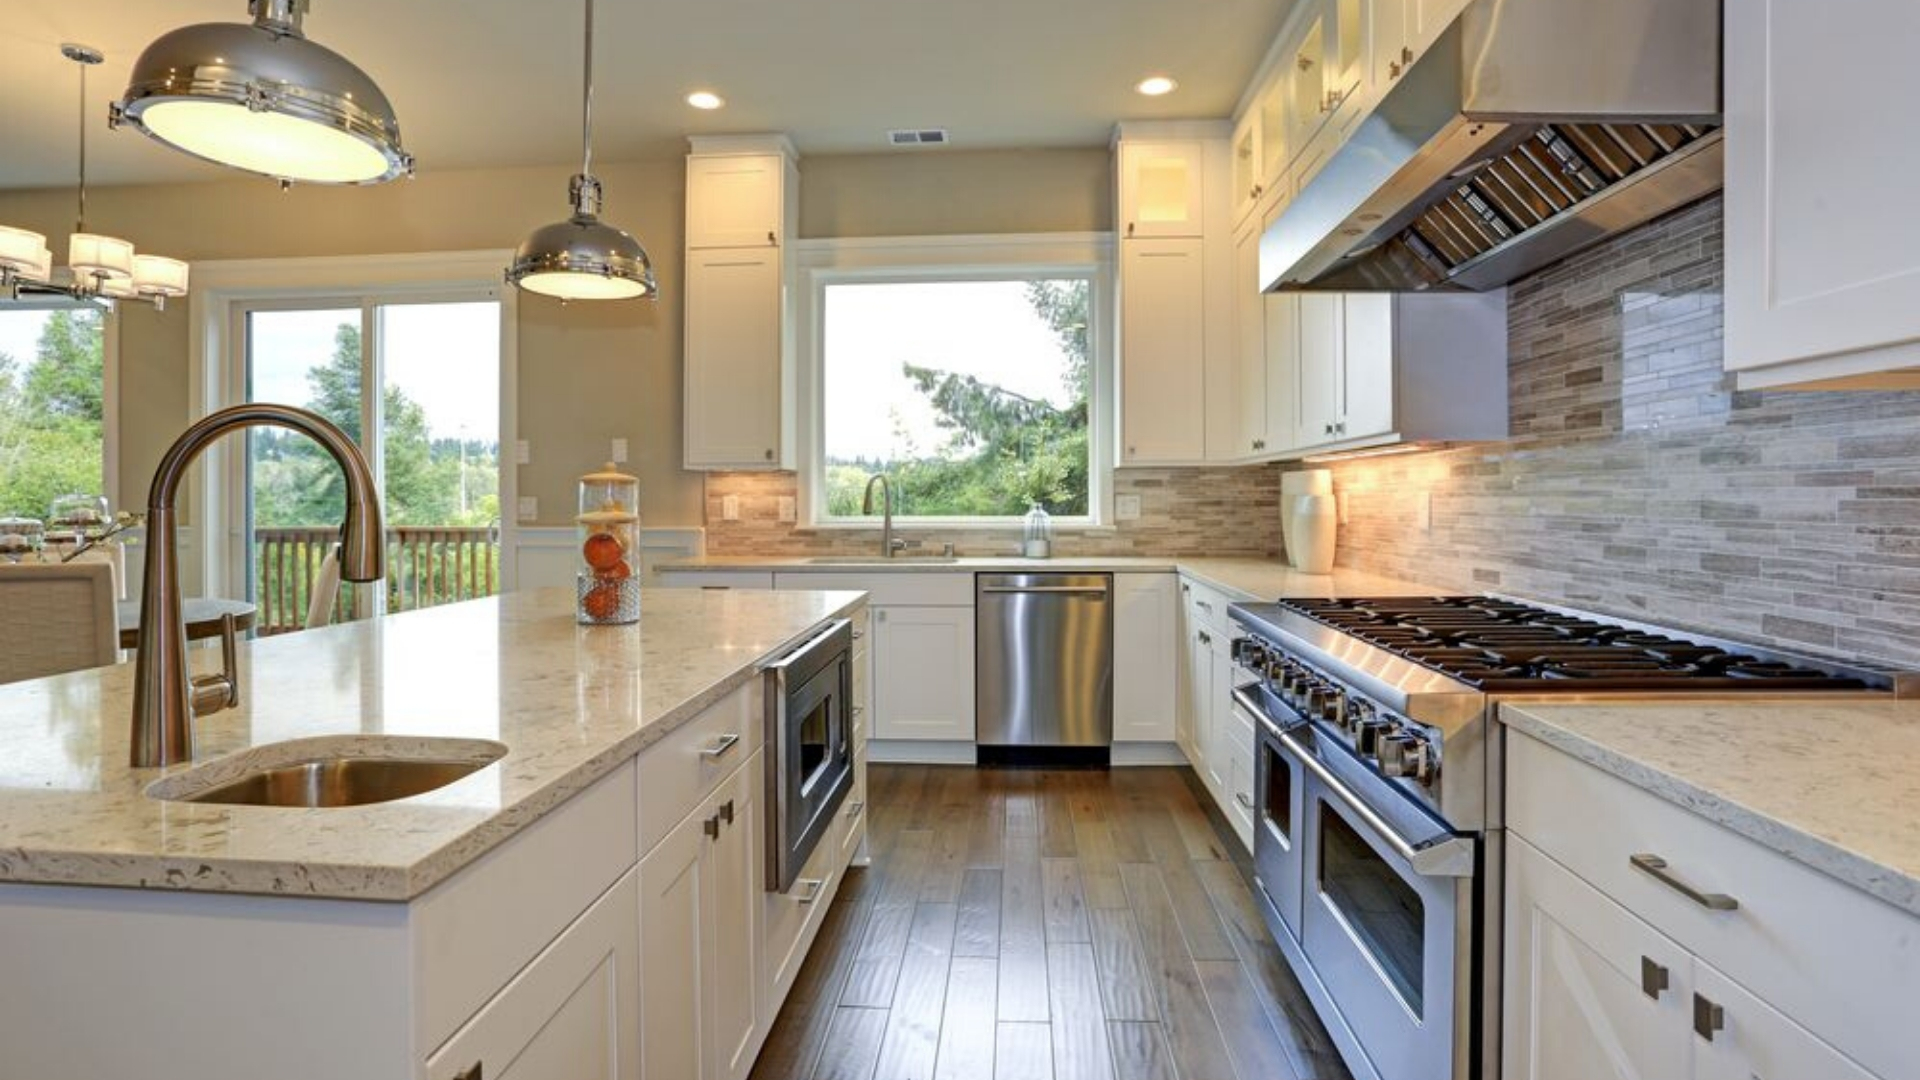 What's Best, a Cooktop and Wall Oven or a Range When Remodeling